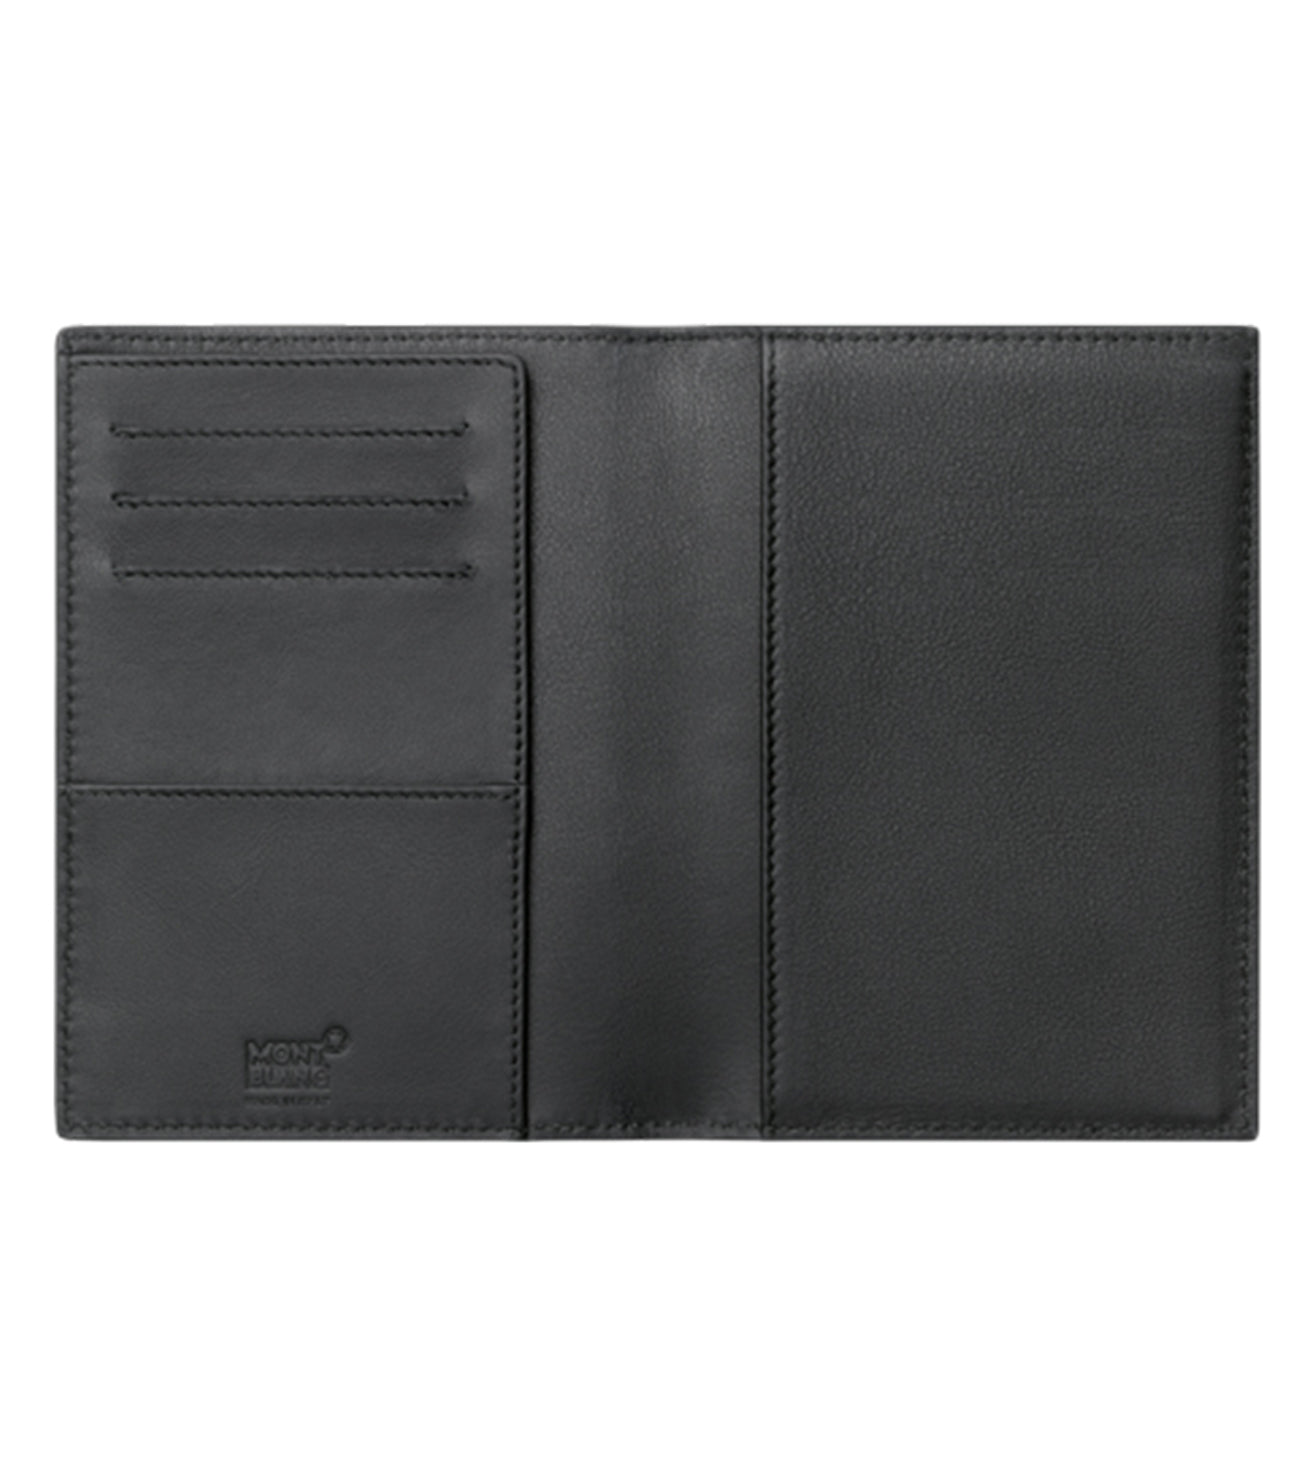 Woven Carbon Leather Passport Holder